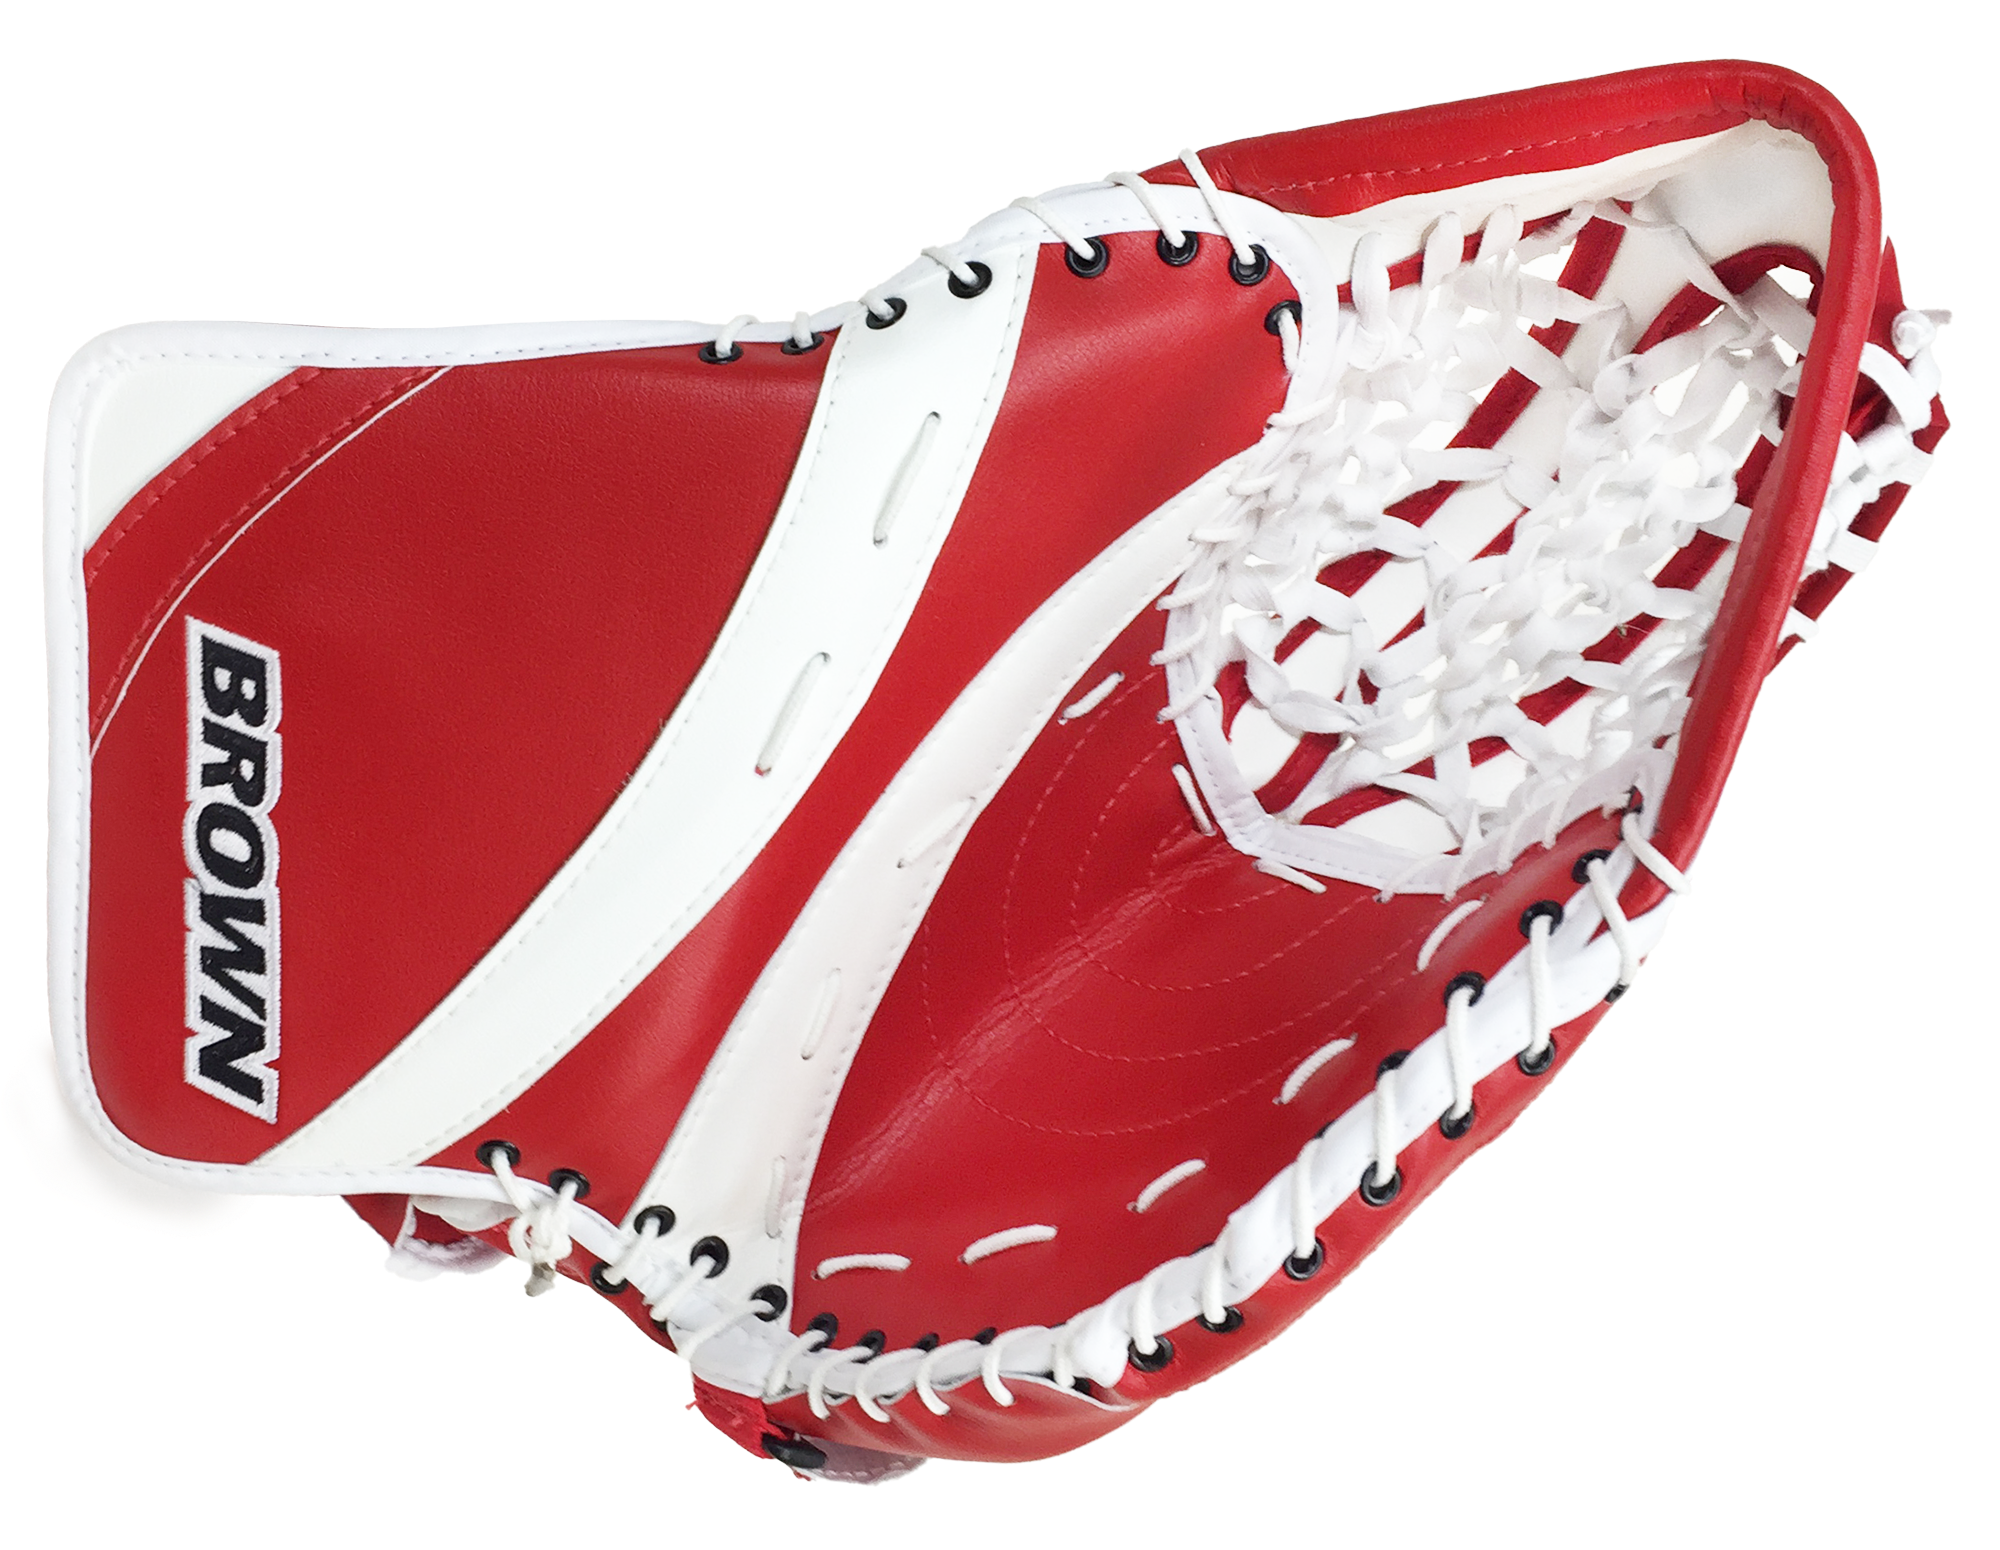 2500 catch glove in red and white